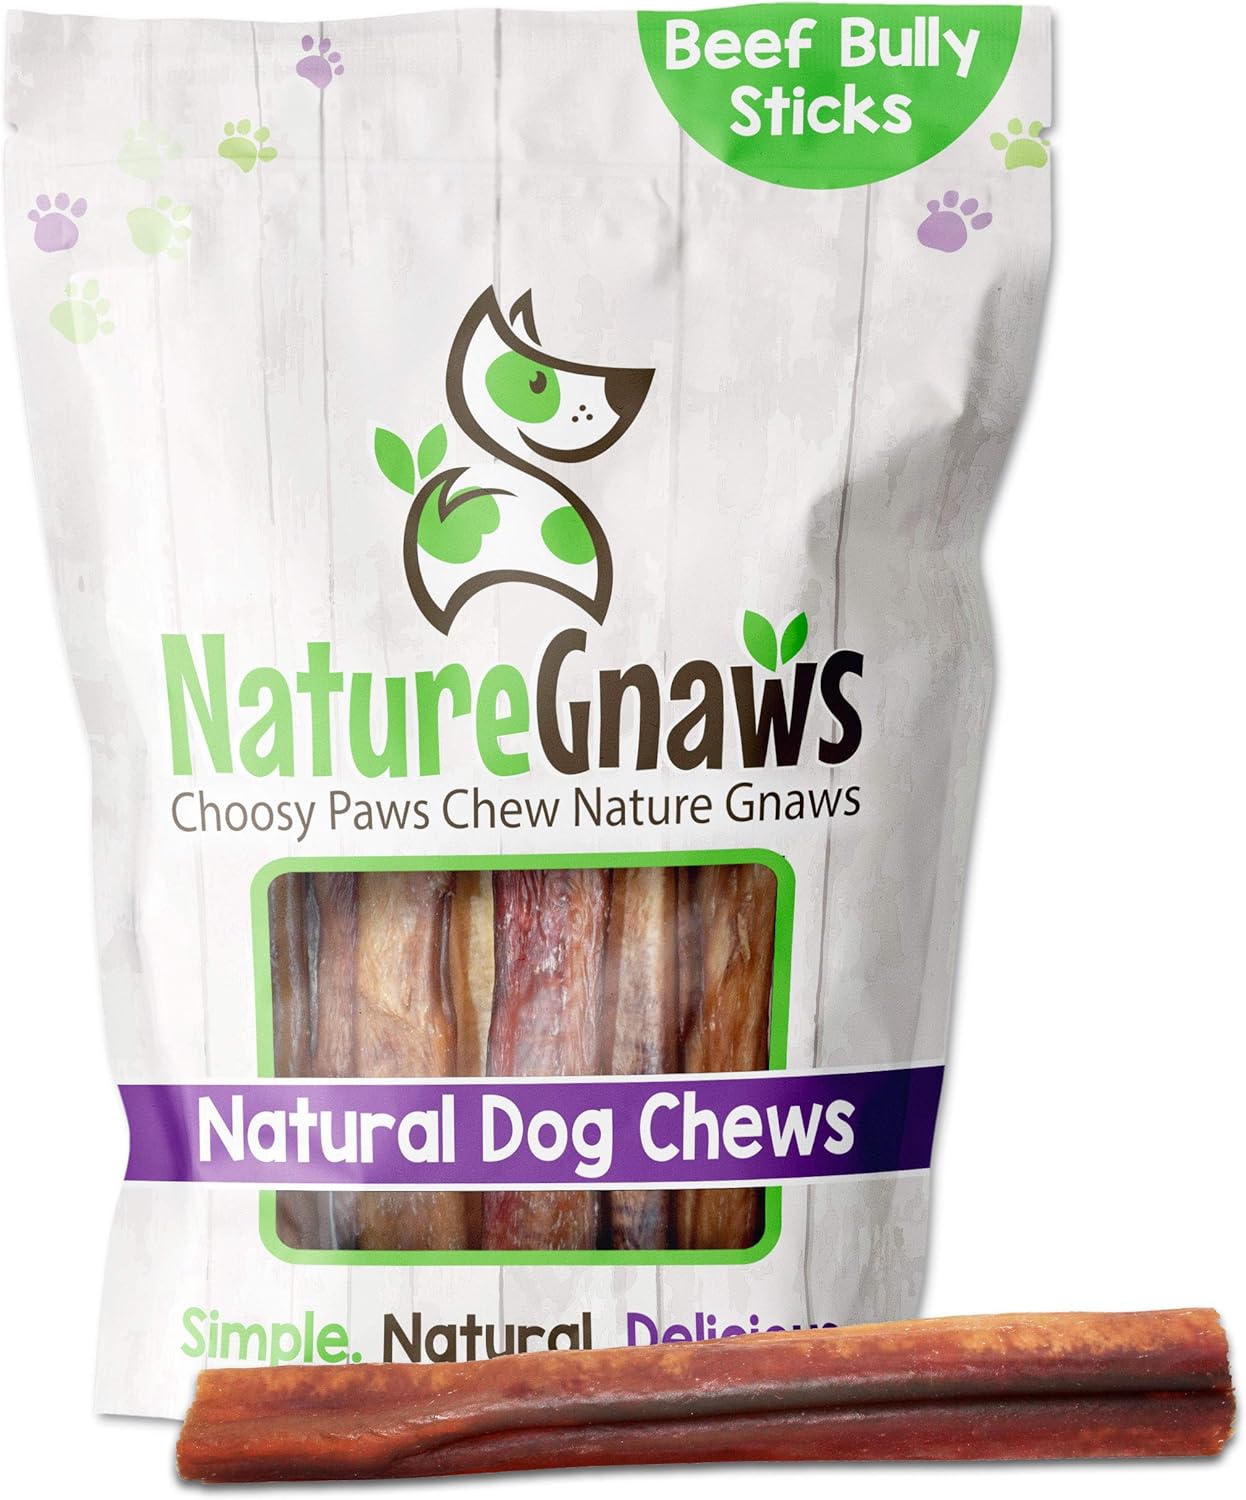 Nature Gnaws Extra Large Bully Sticks for Dogs - Premium Natural Beef Dental Bones - Thick Long Lasting Dog Chew Treats for Aggressive Chewers - Rawhide Free